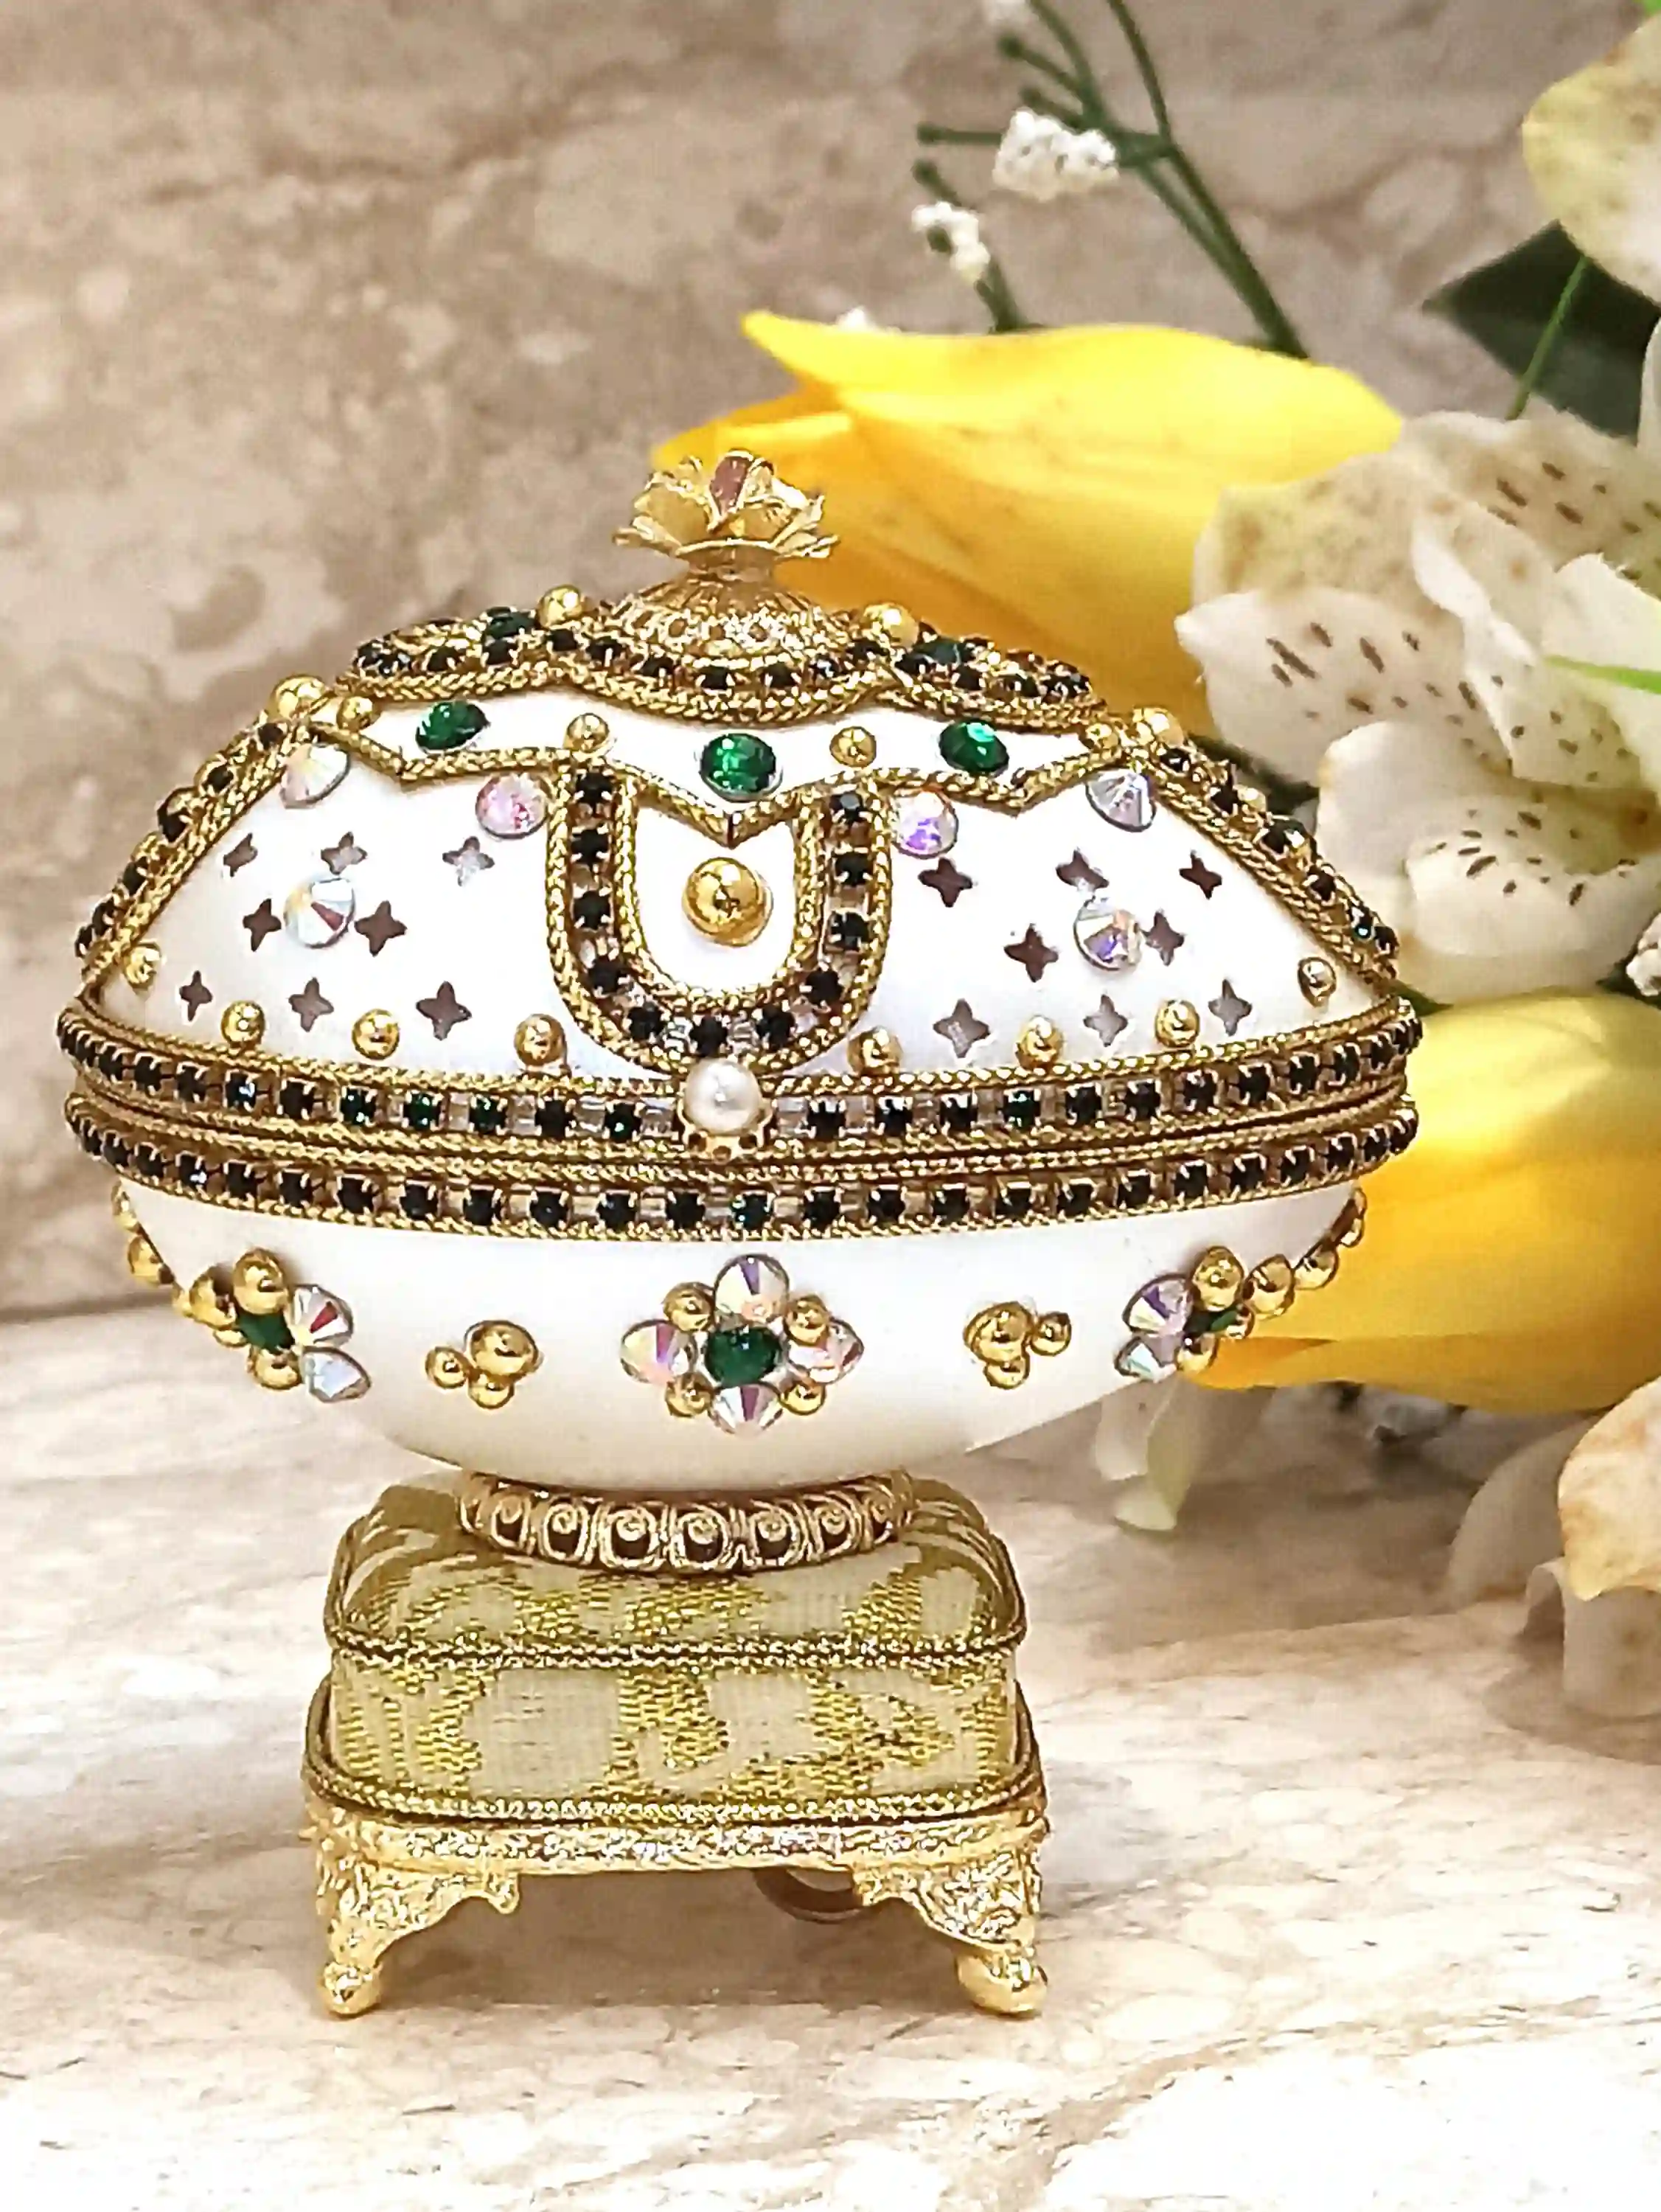 Faberge-One of a kind Gifts for women-Faberge Egg Ornament-Faberge Pendant -24k Gold - Home Decor - Unique Birthday gift- Emerald Gift Box - 